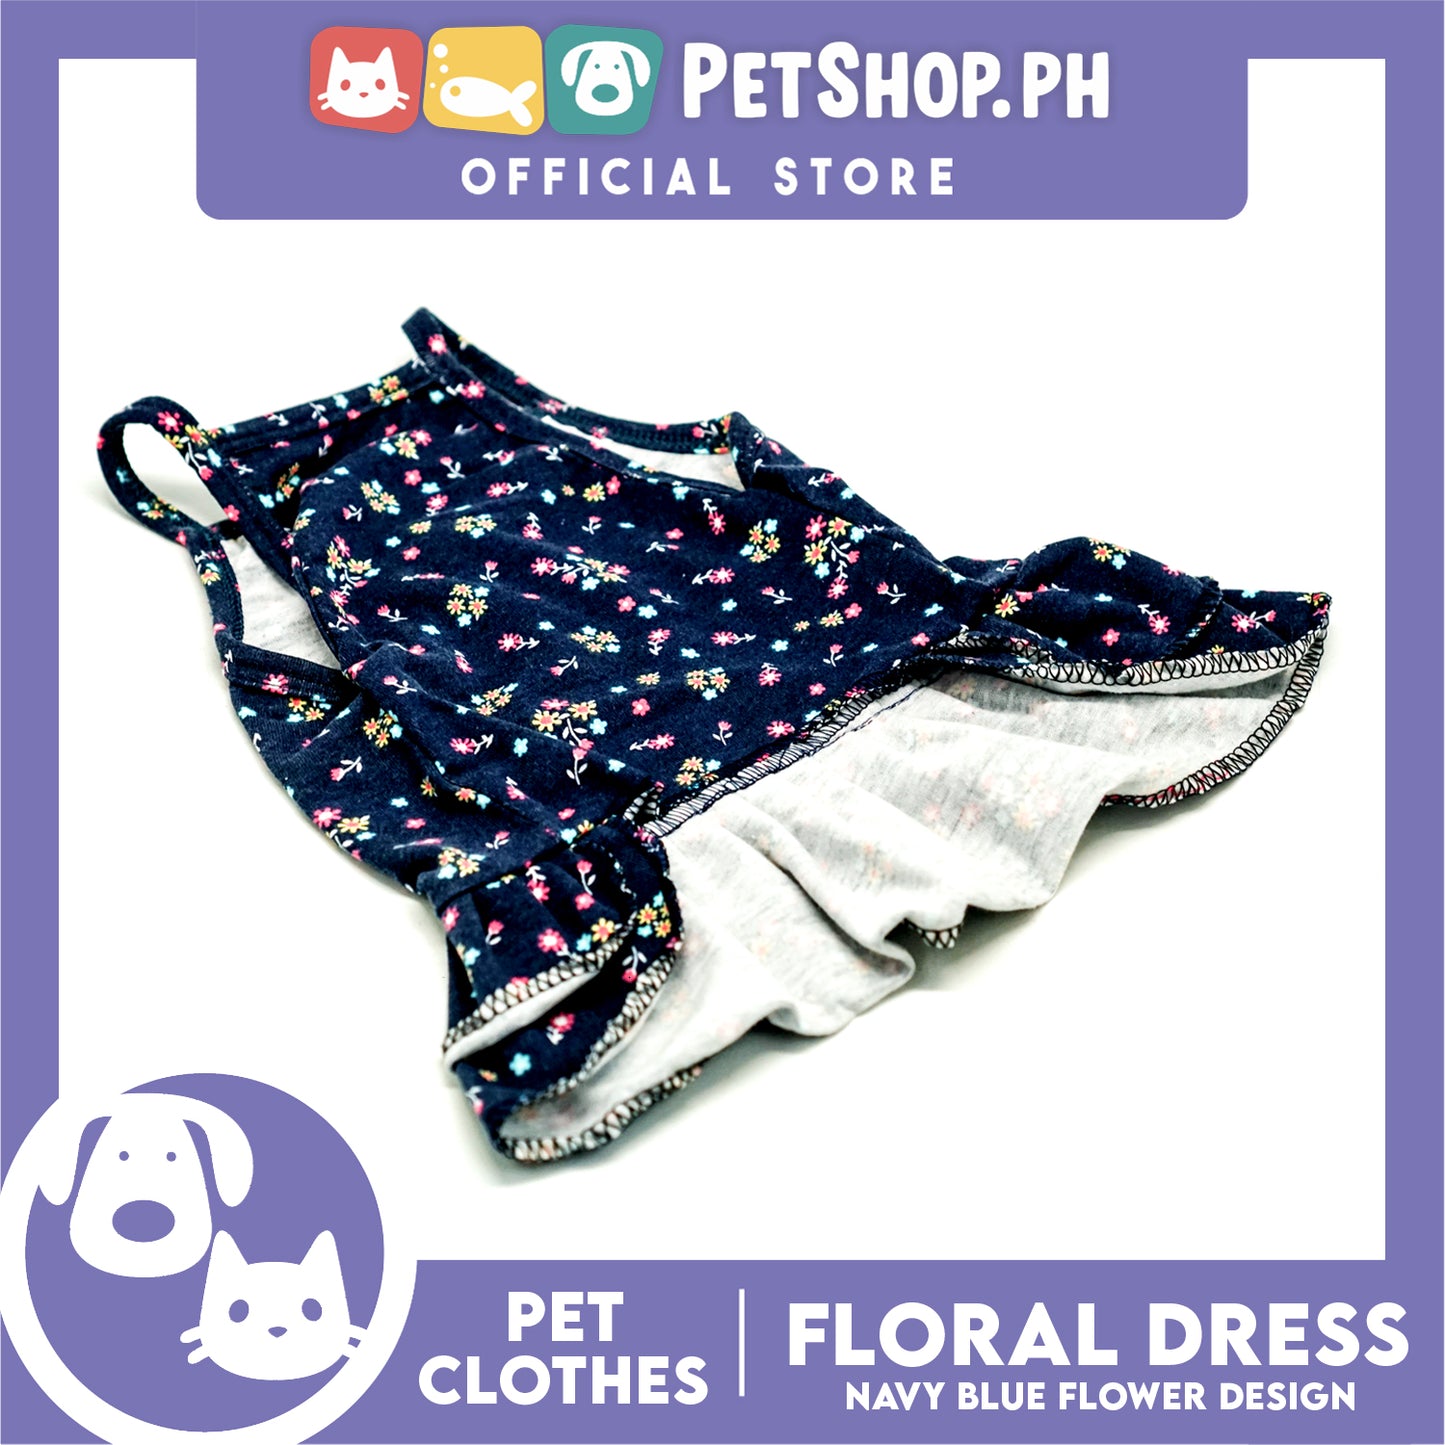 Pet Dress Navy Blue Floral Dreess (Medium) Perfect Fit for Dogs and Cats